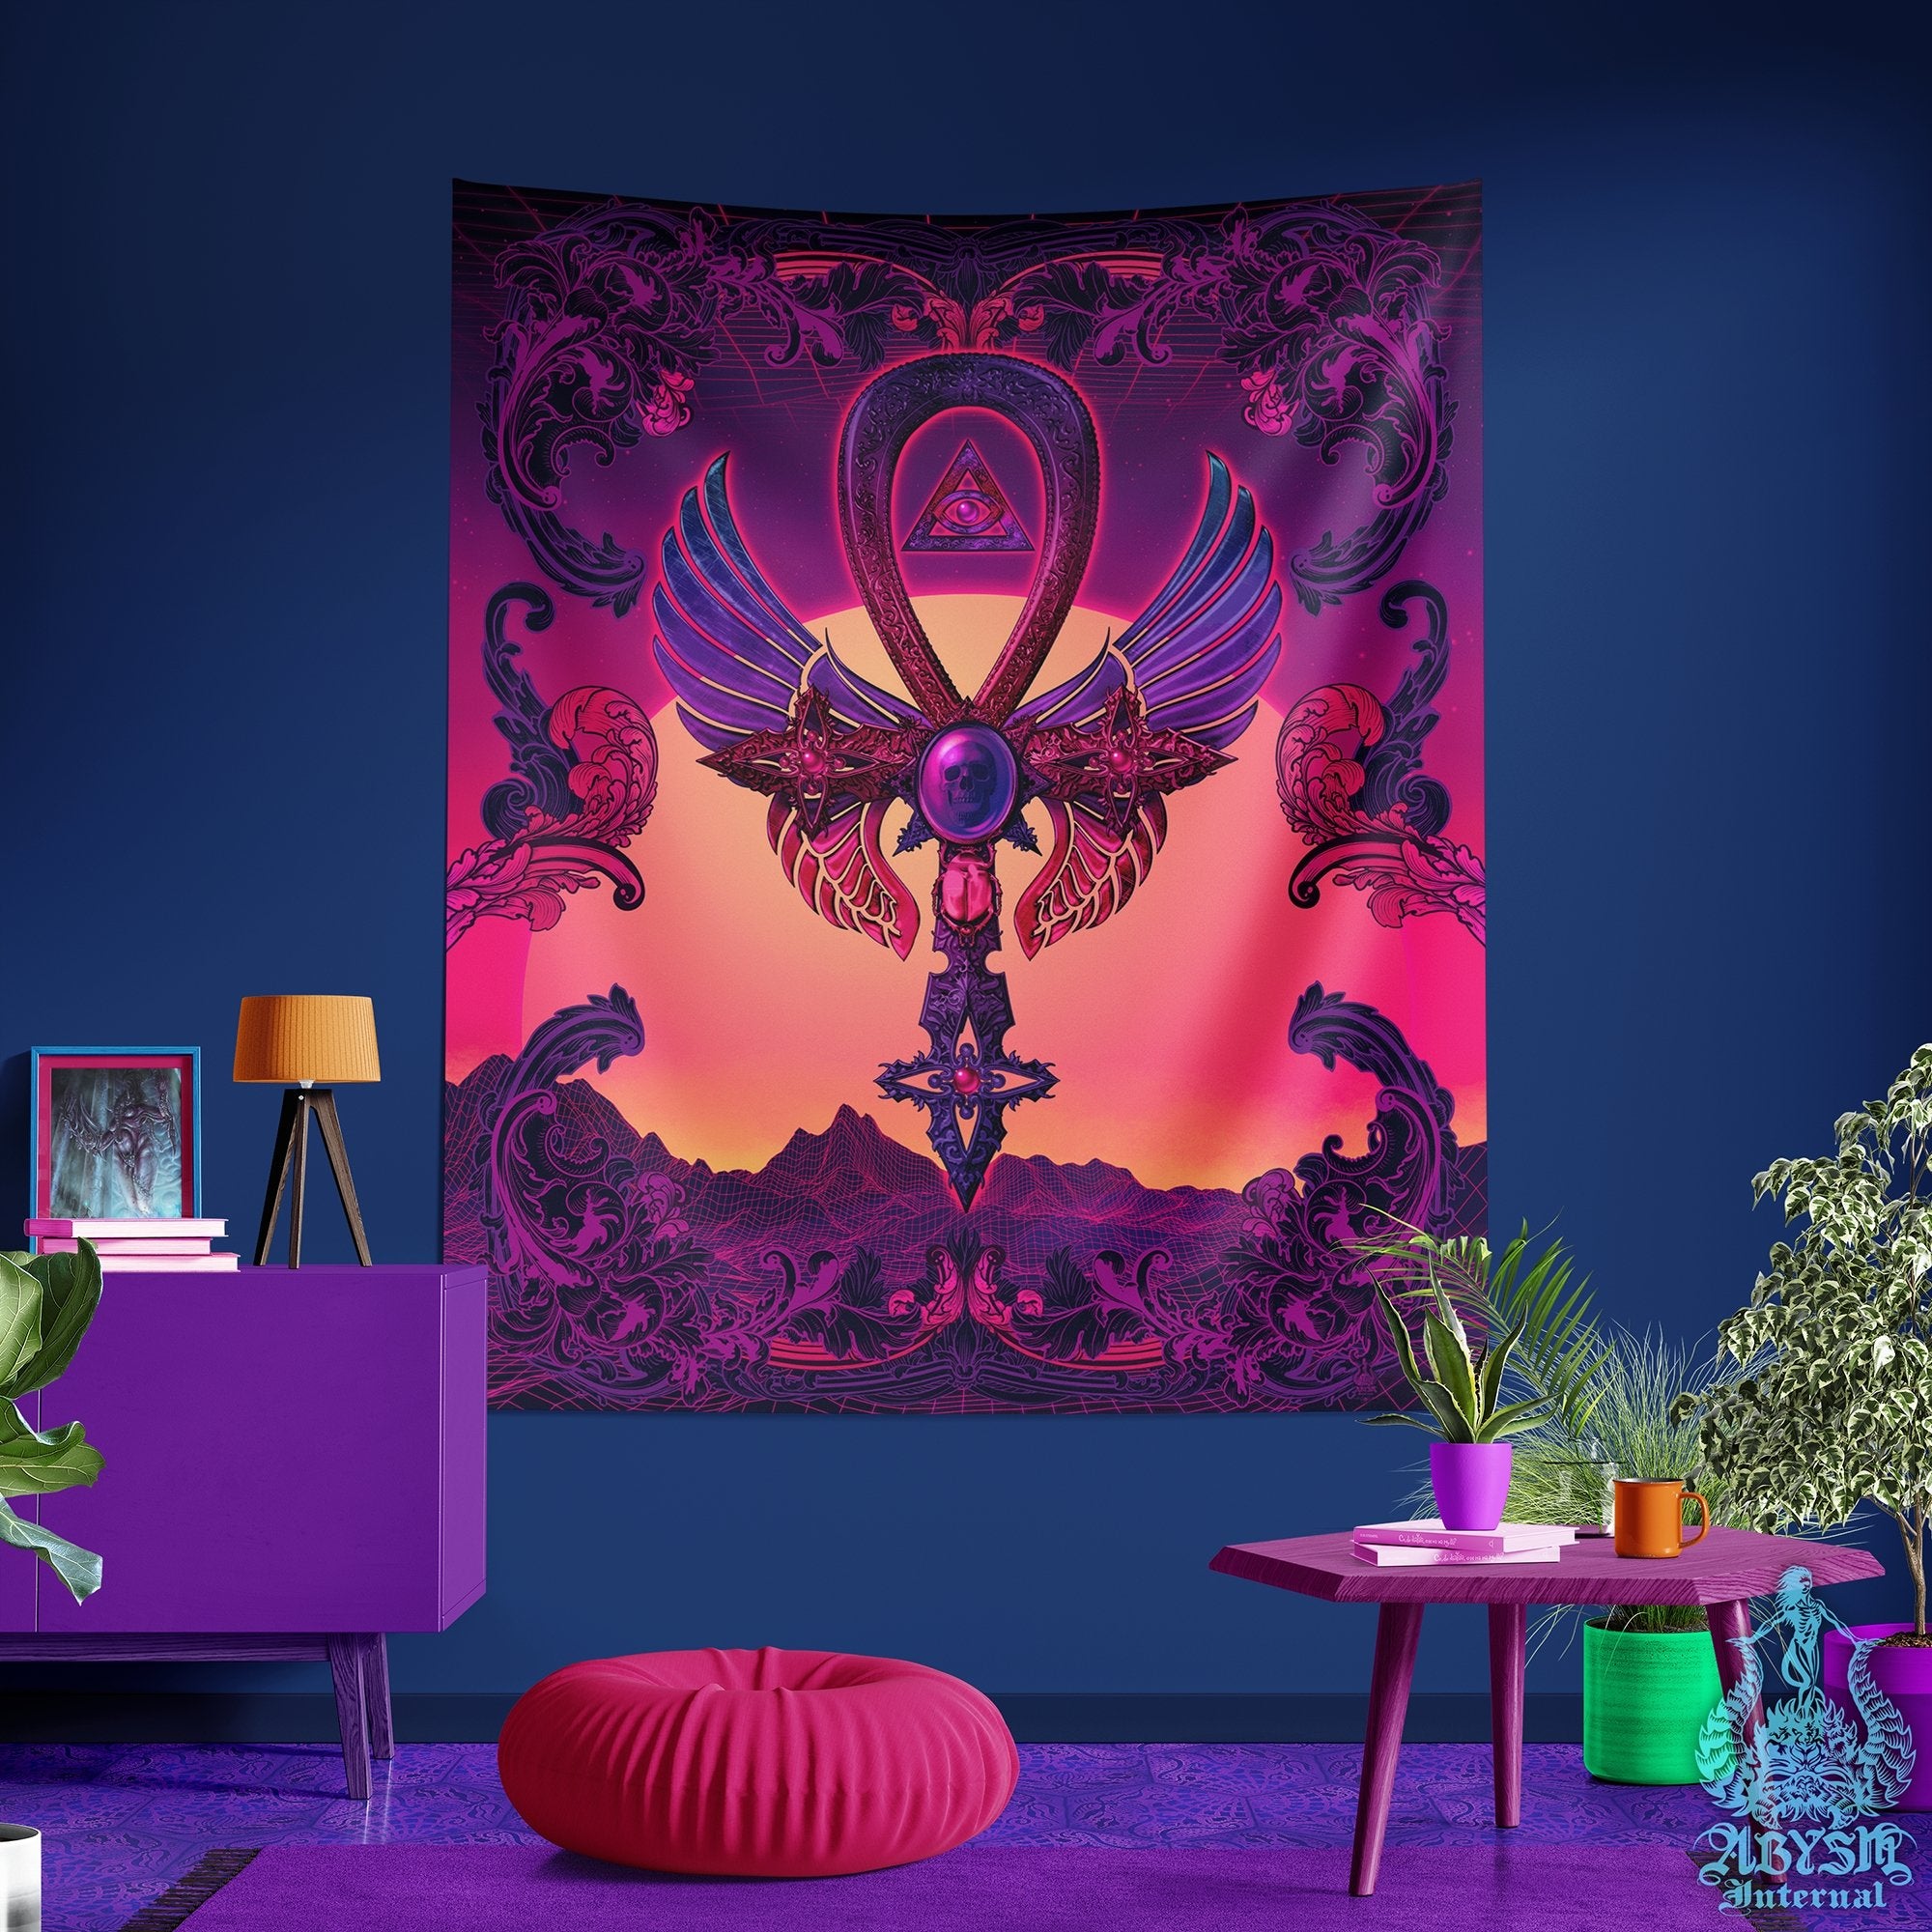 Vaporwave Tapestry, Synthwave Wall Hanging, Retrowave 80s Home Decor, Art Print, Eclectic and Funky - Ankh - Abysm Internal